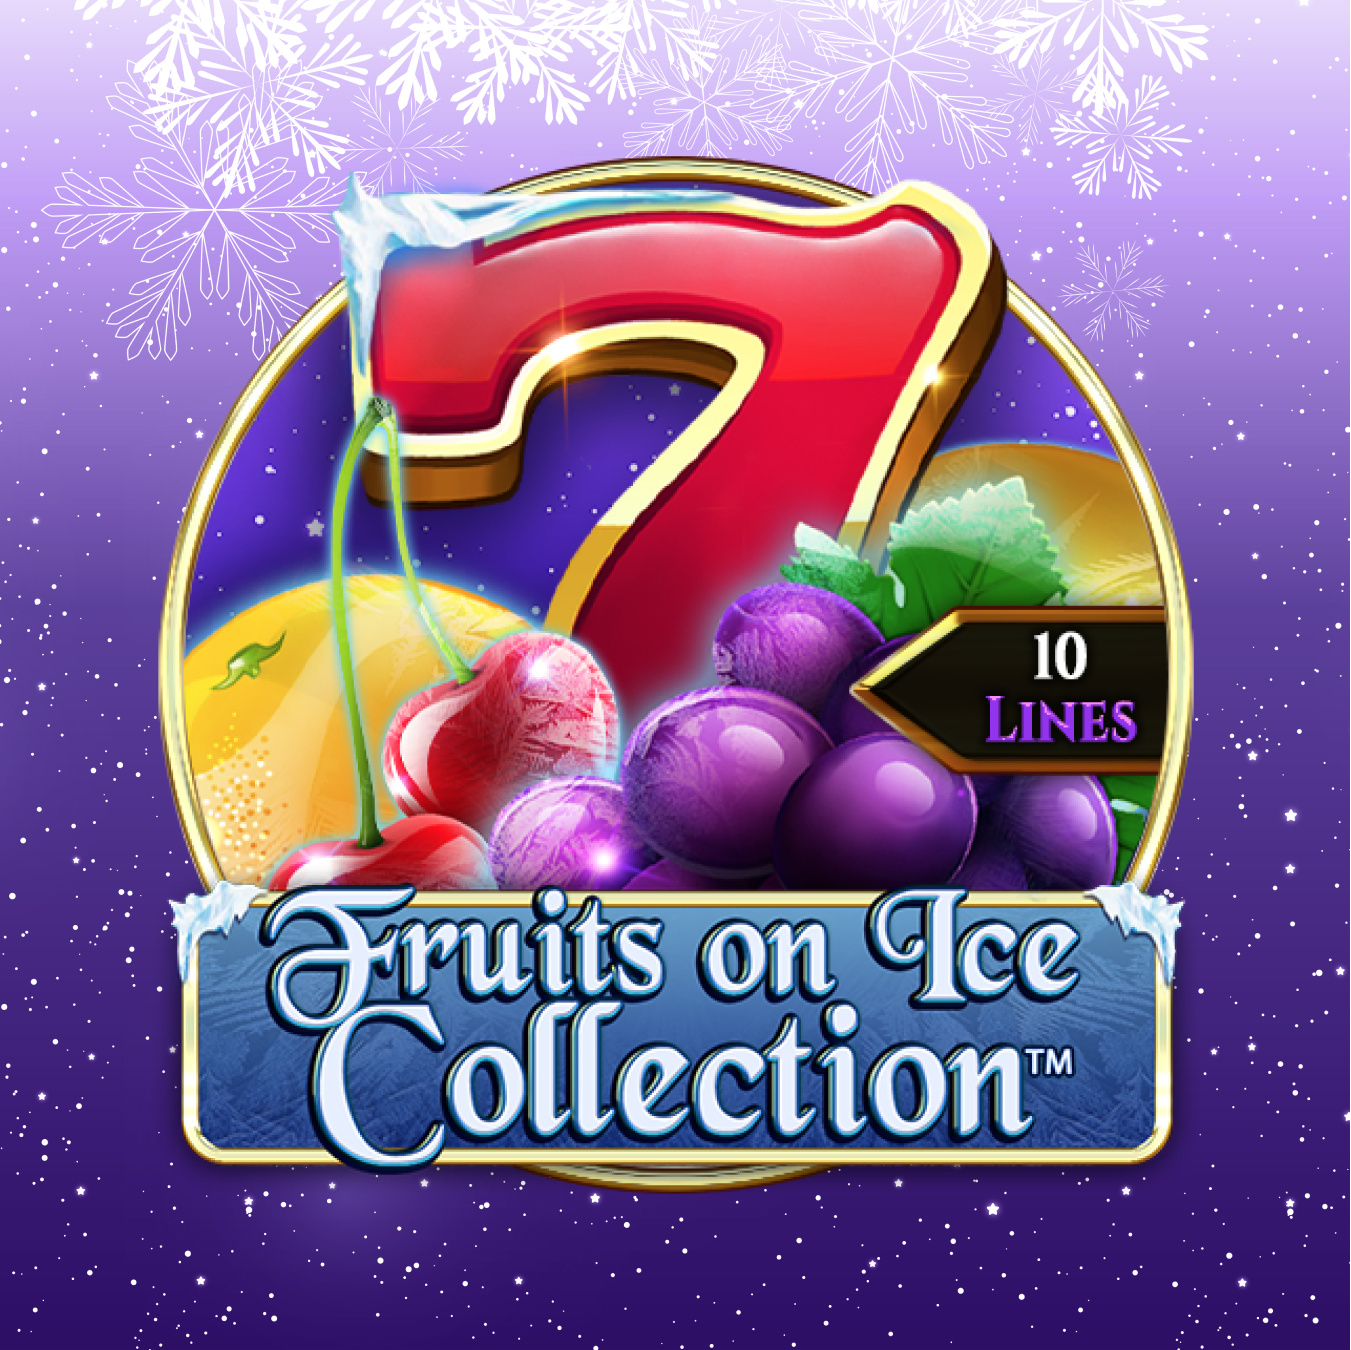 Fruits on Ice Collection 10 Lines